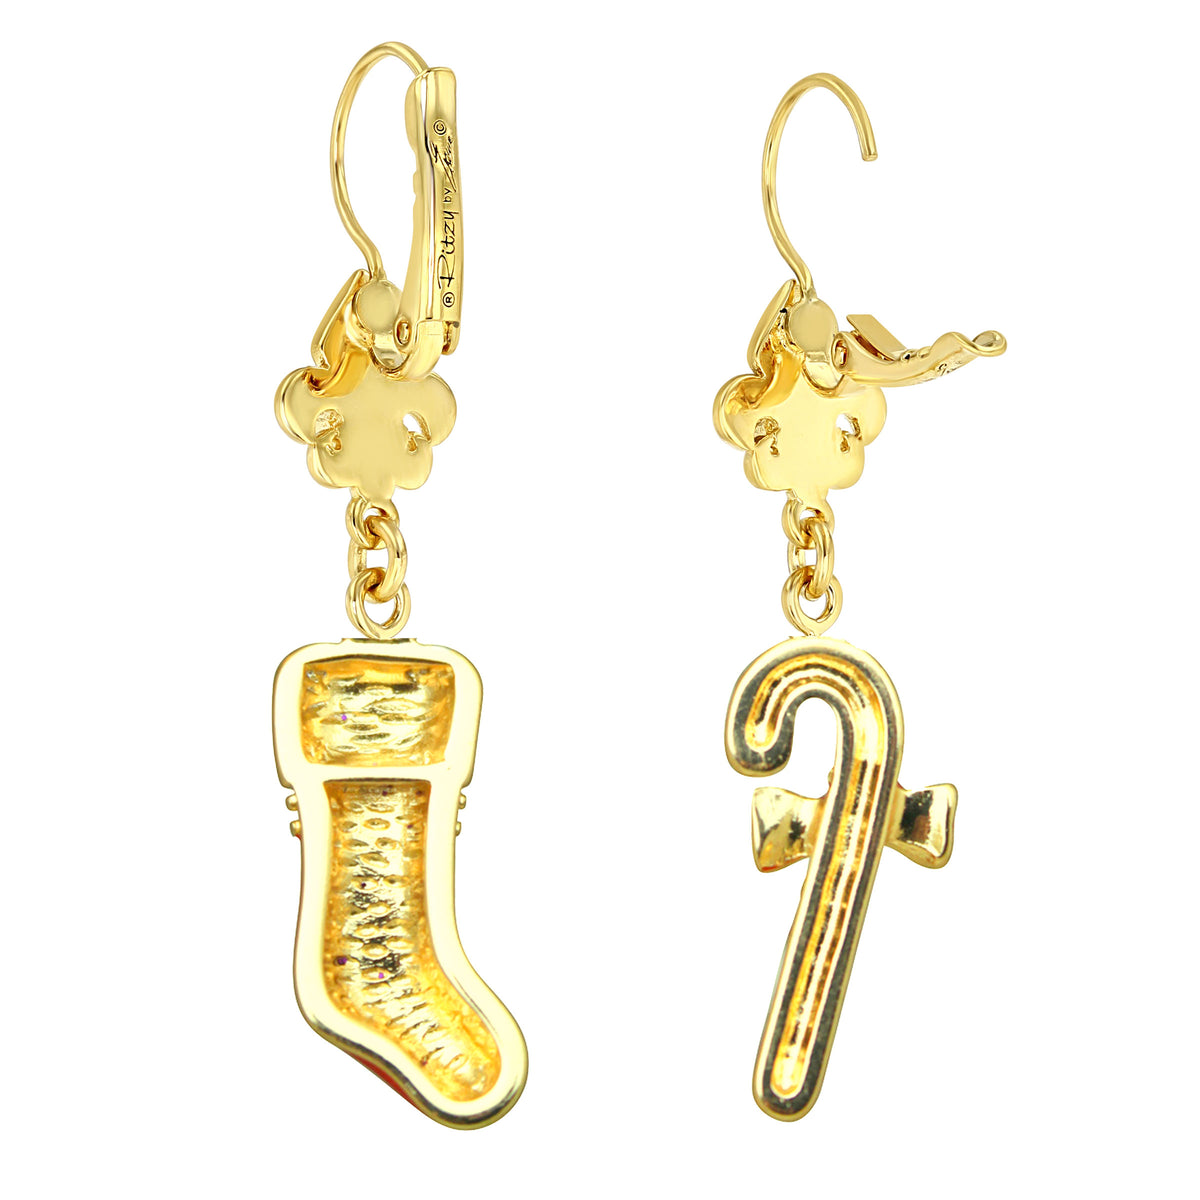 Candy Cane Christmas Stockings  Leverback Earrings Ritzy Couture DeLuxe 22k Gold Plated